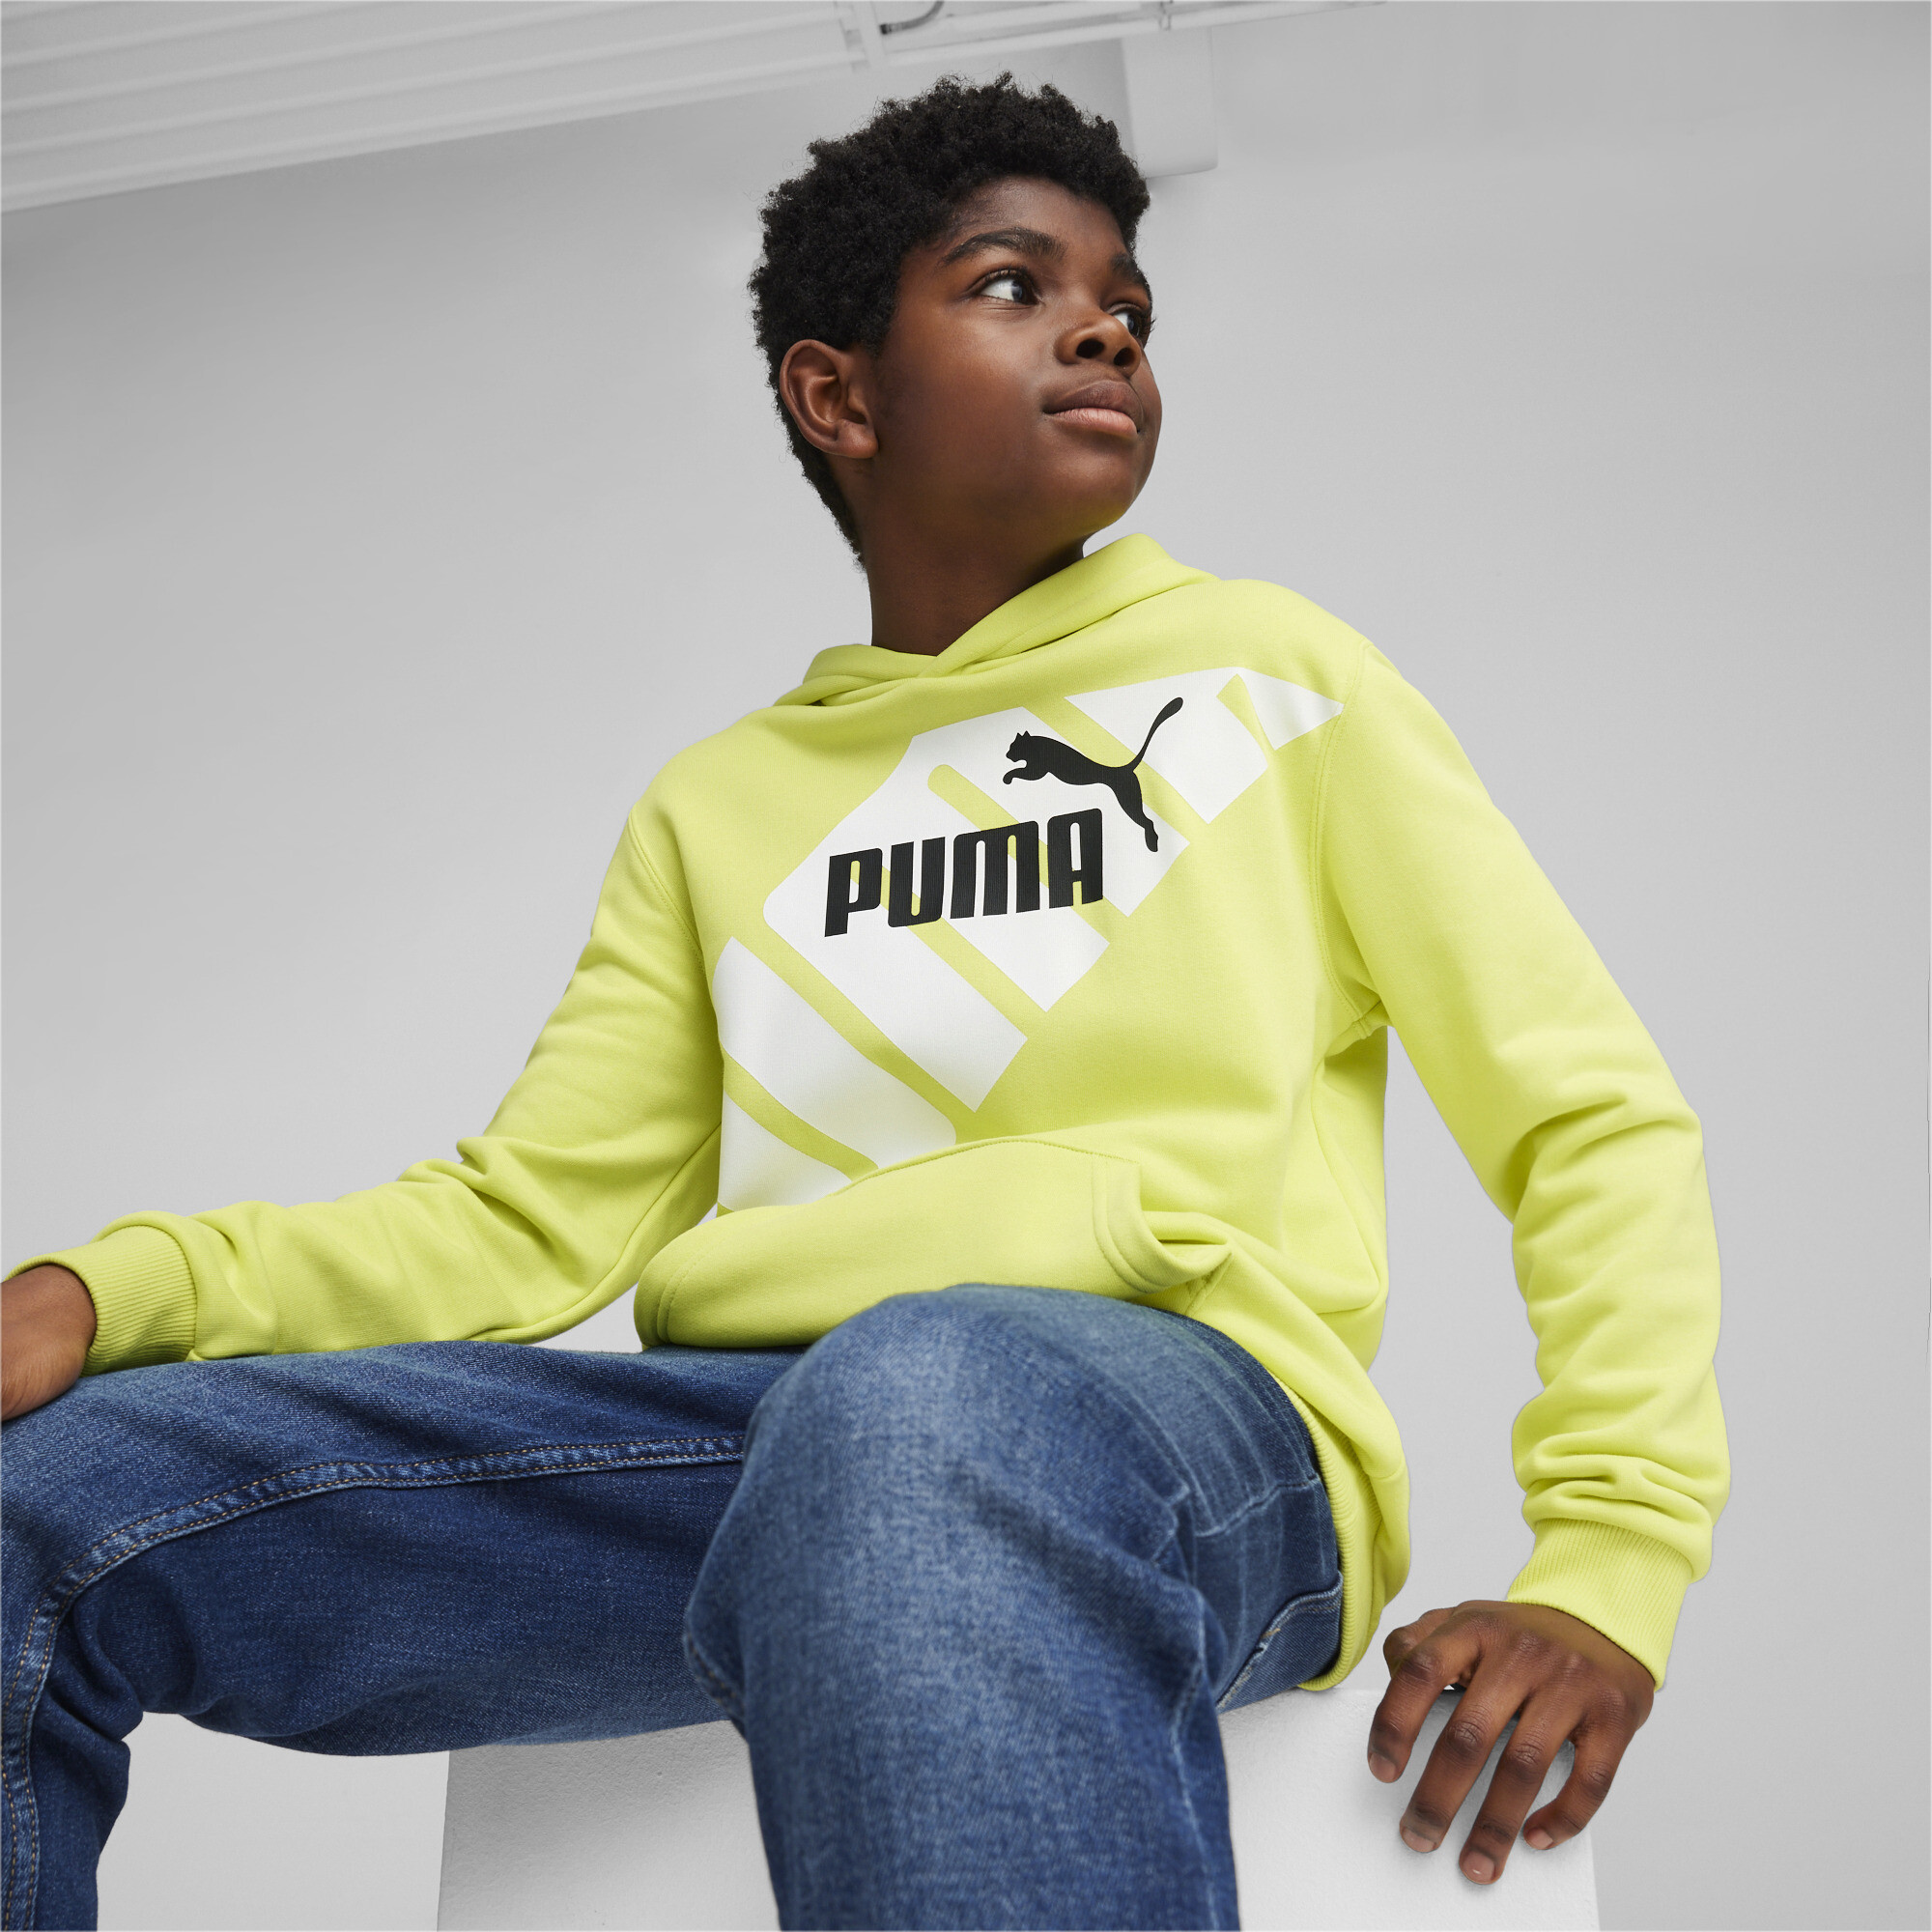 Men's Puma POWER Youth Graphic Hoodie, Green, Size 13-14Y, Age